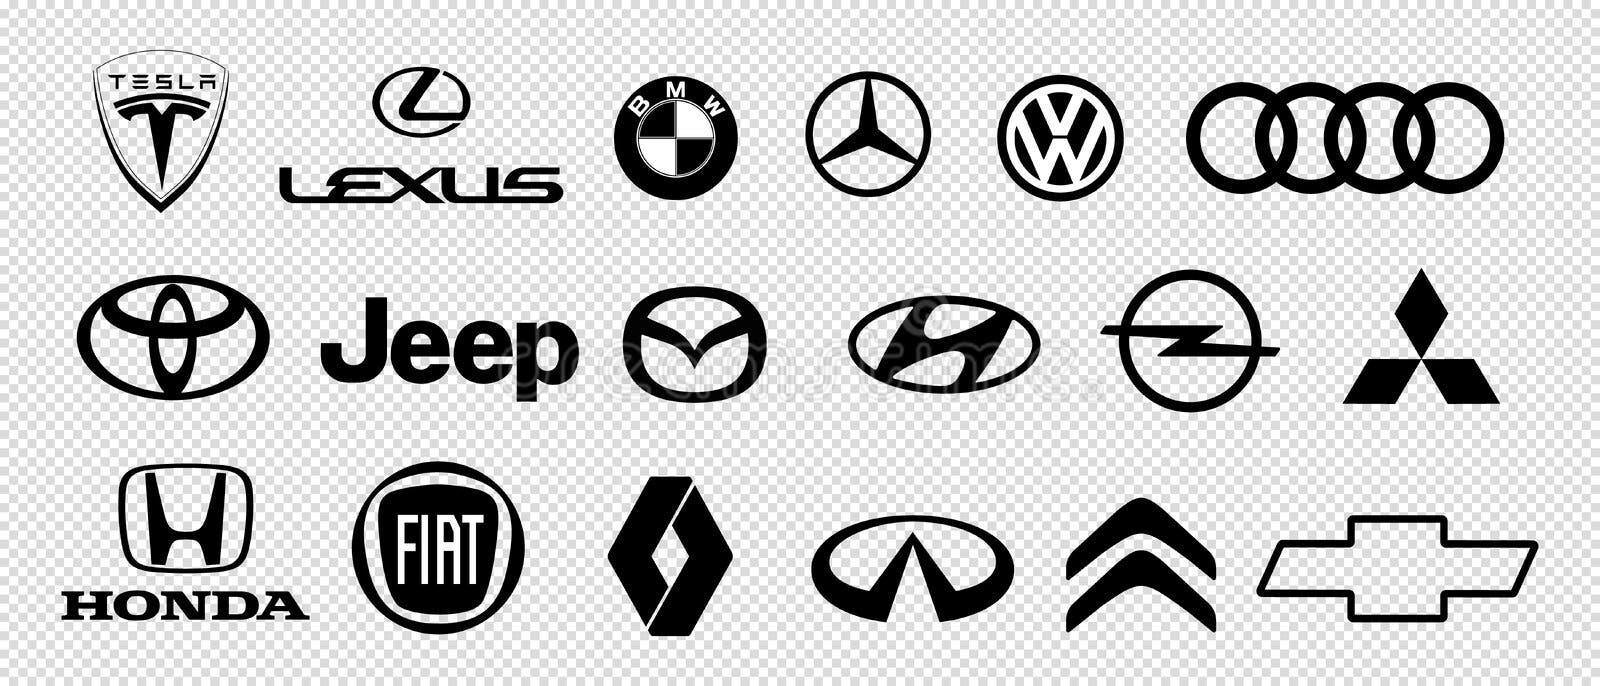 Mercedes Cars International Group, Flags with Logo, Illustration ...